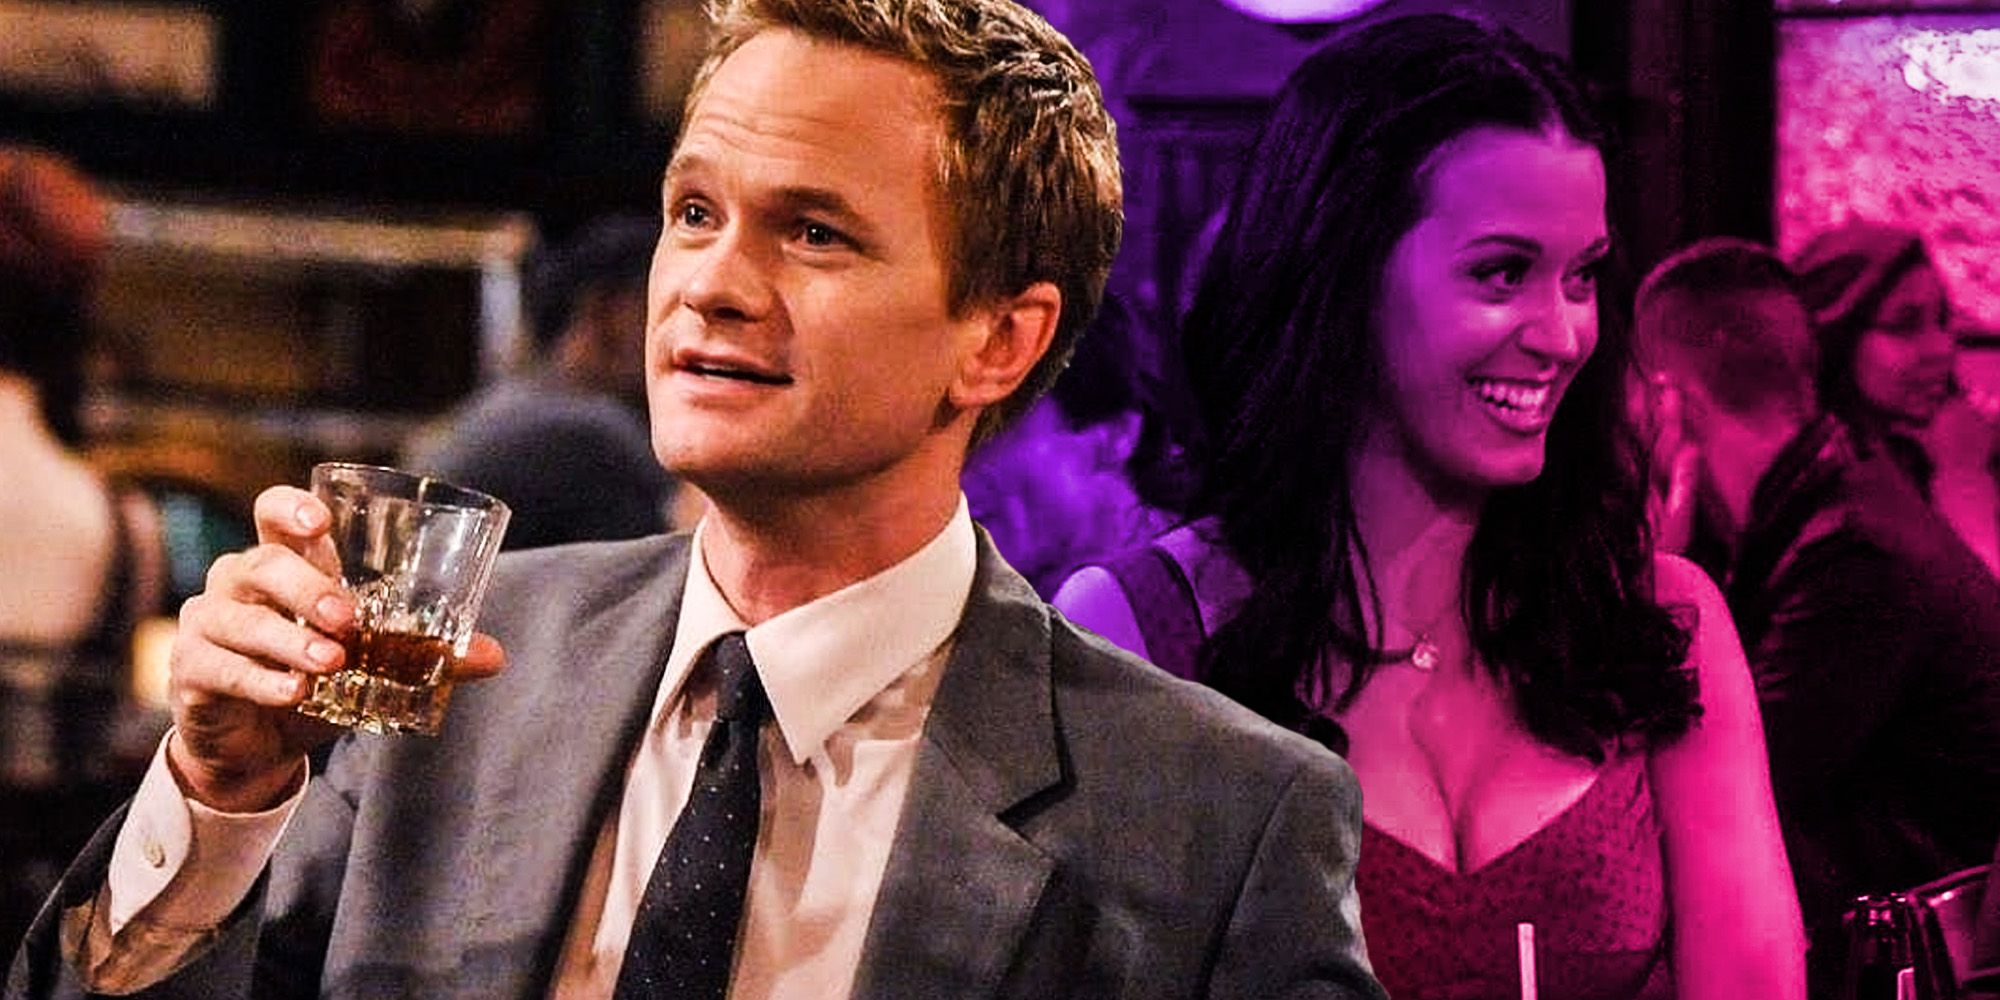 Barney stinson katy perry how i met your mother